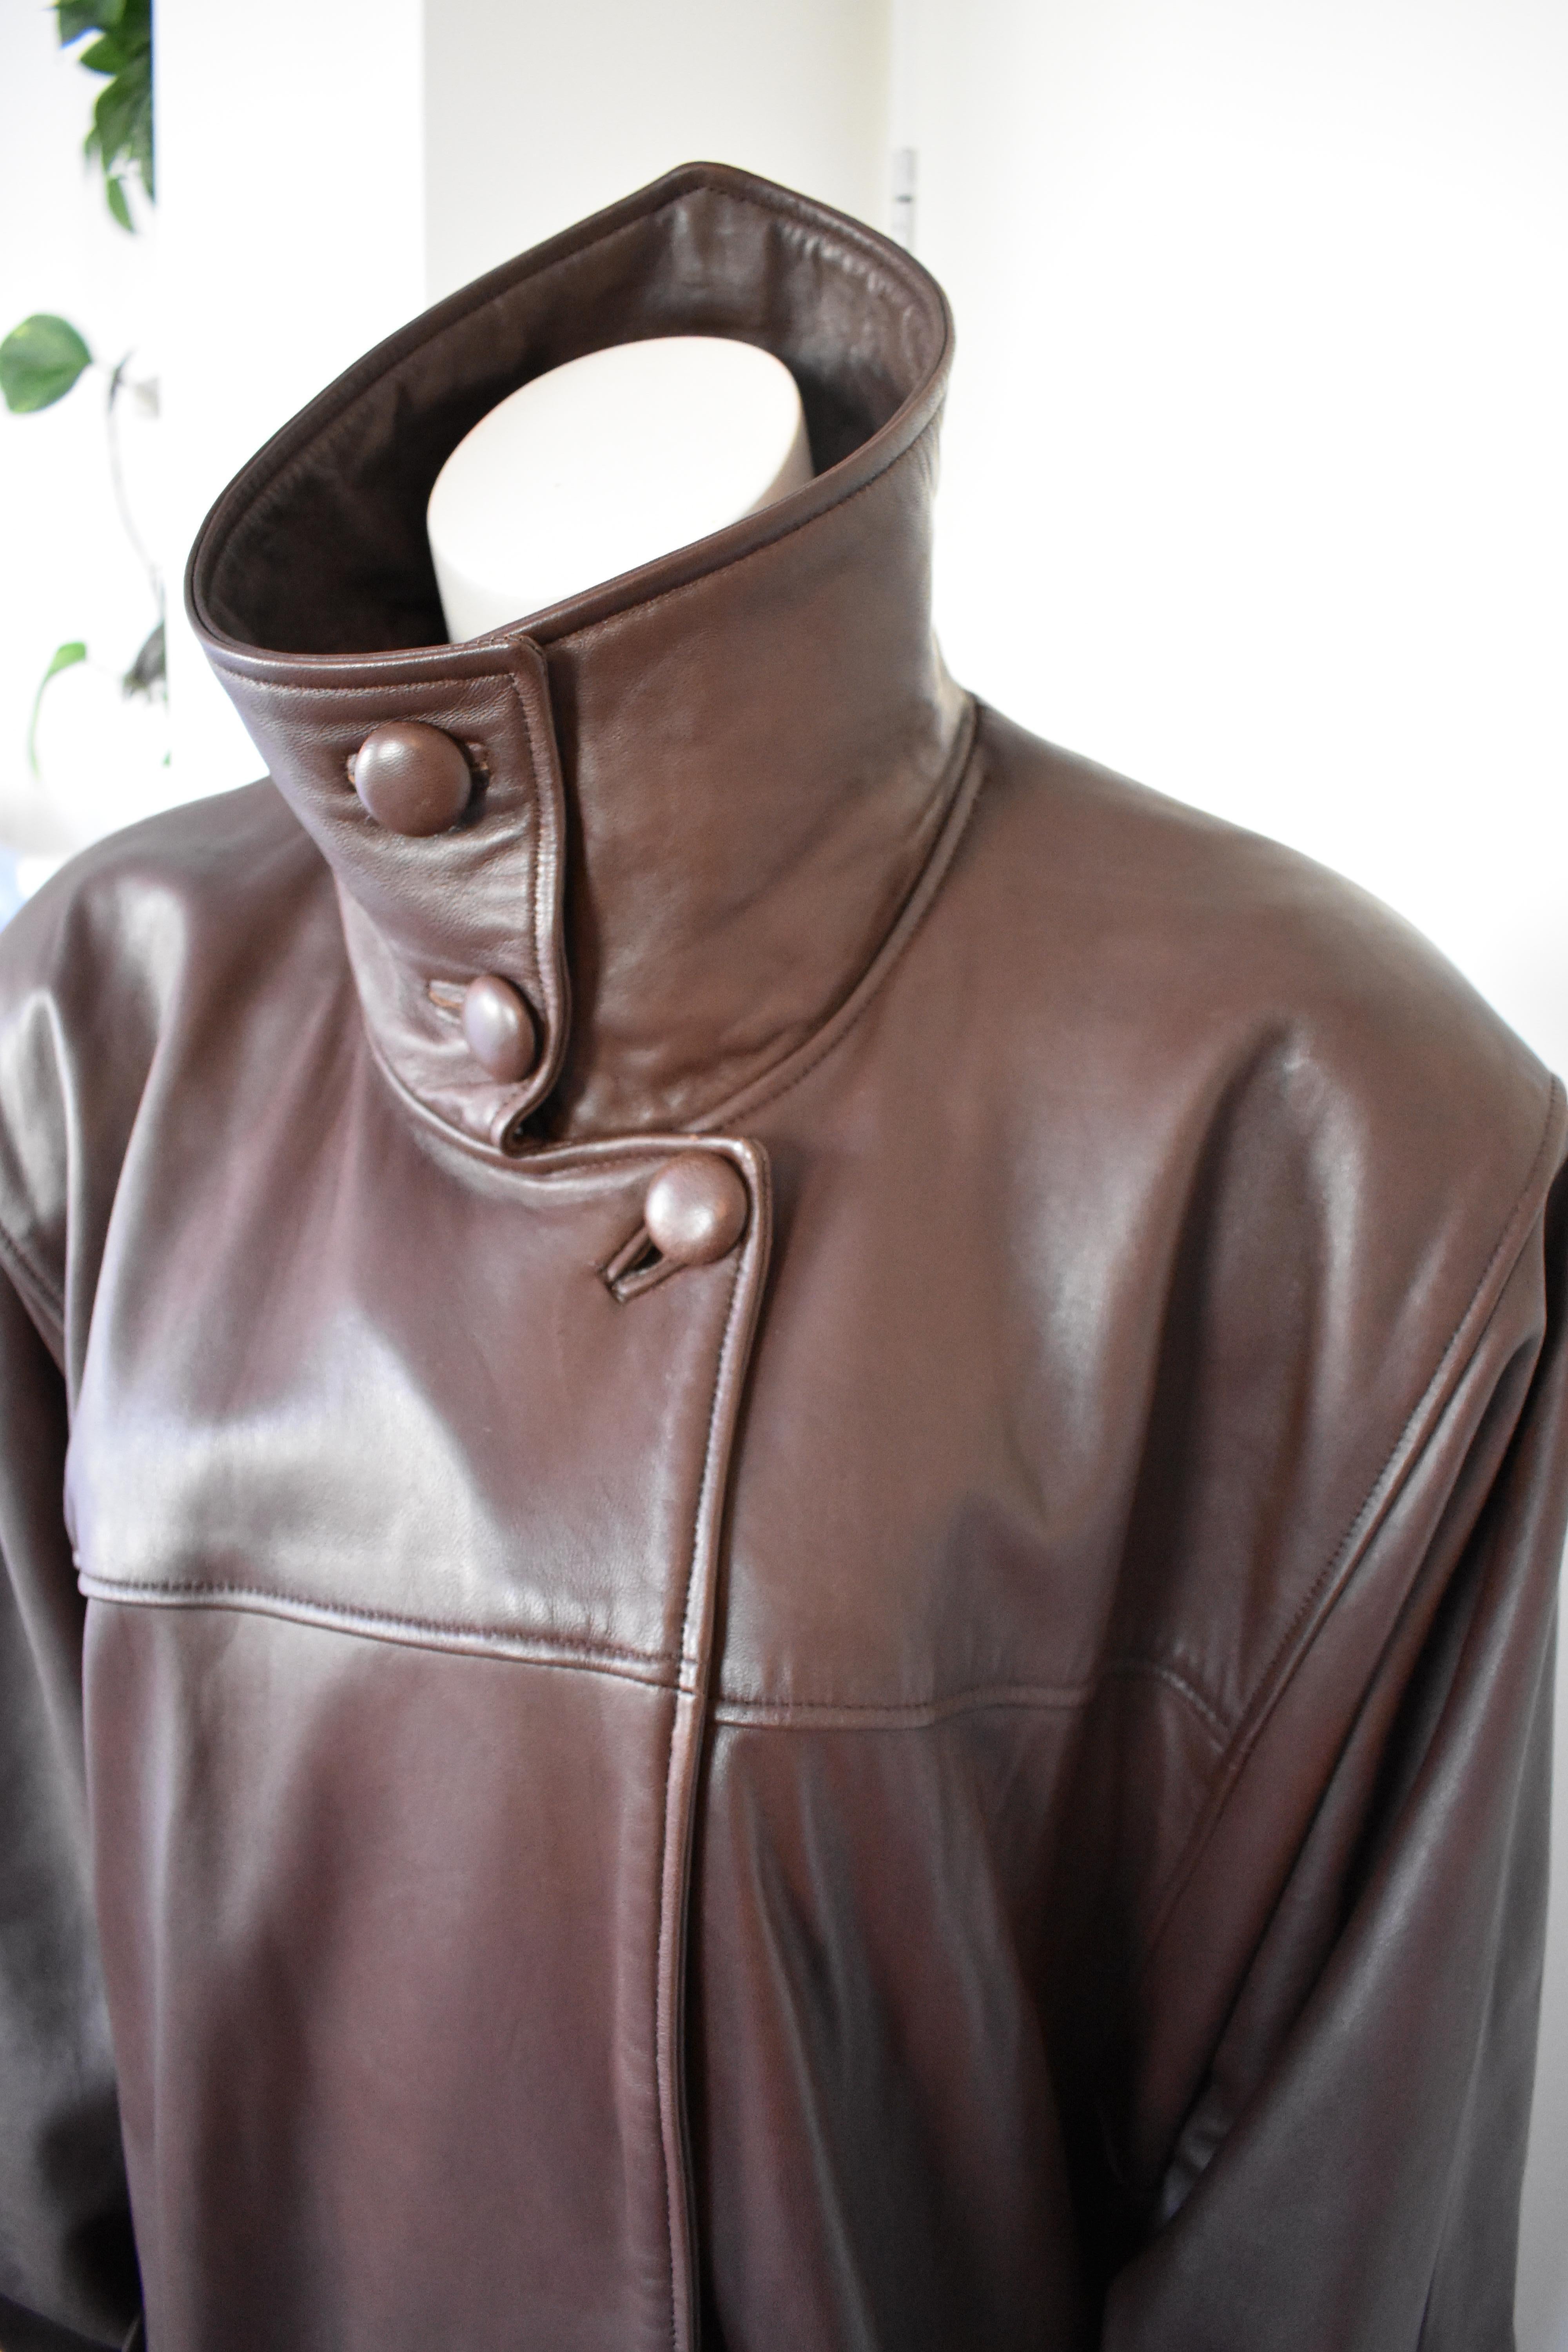 Chocolate Brown Leather Coat by Carven Paris 5